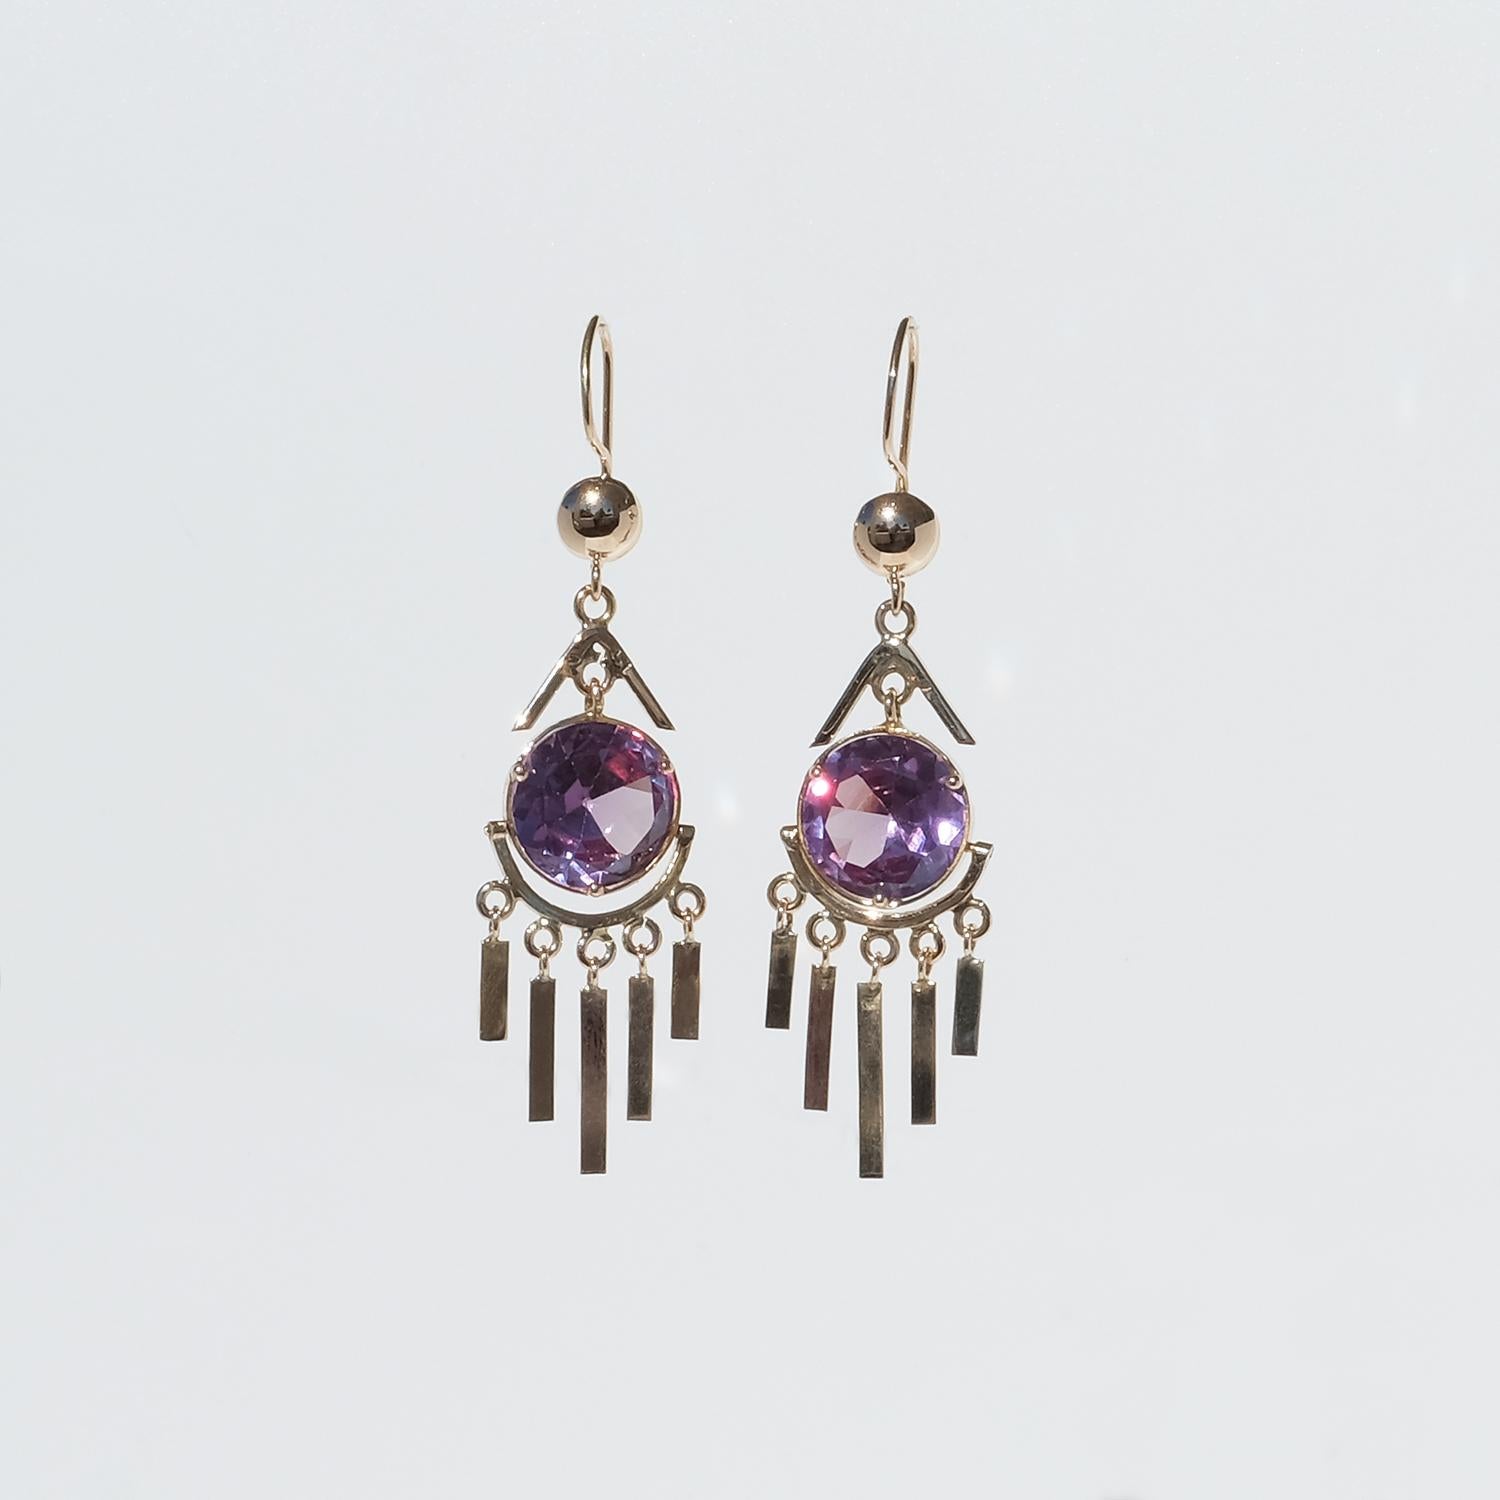 These 18 karat gold earrings are adorned with brilliant cut amethysts. Below each amethyst dangles five flat golden bars making the earrings look like luxurious dream catchers. They have so called fish hook backs which are secured in the back.

The